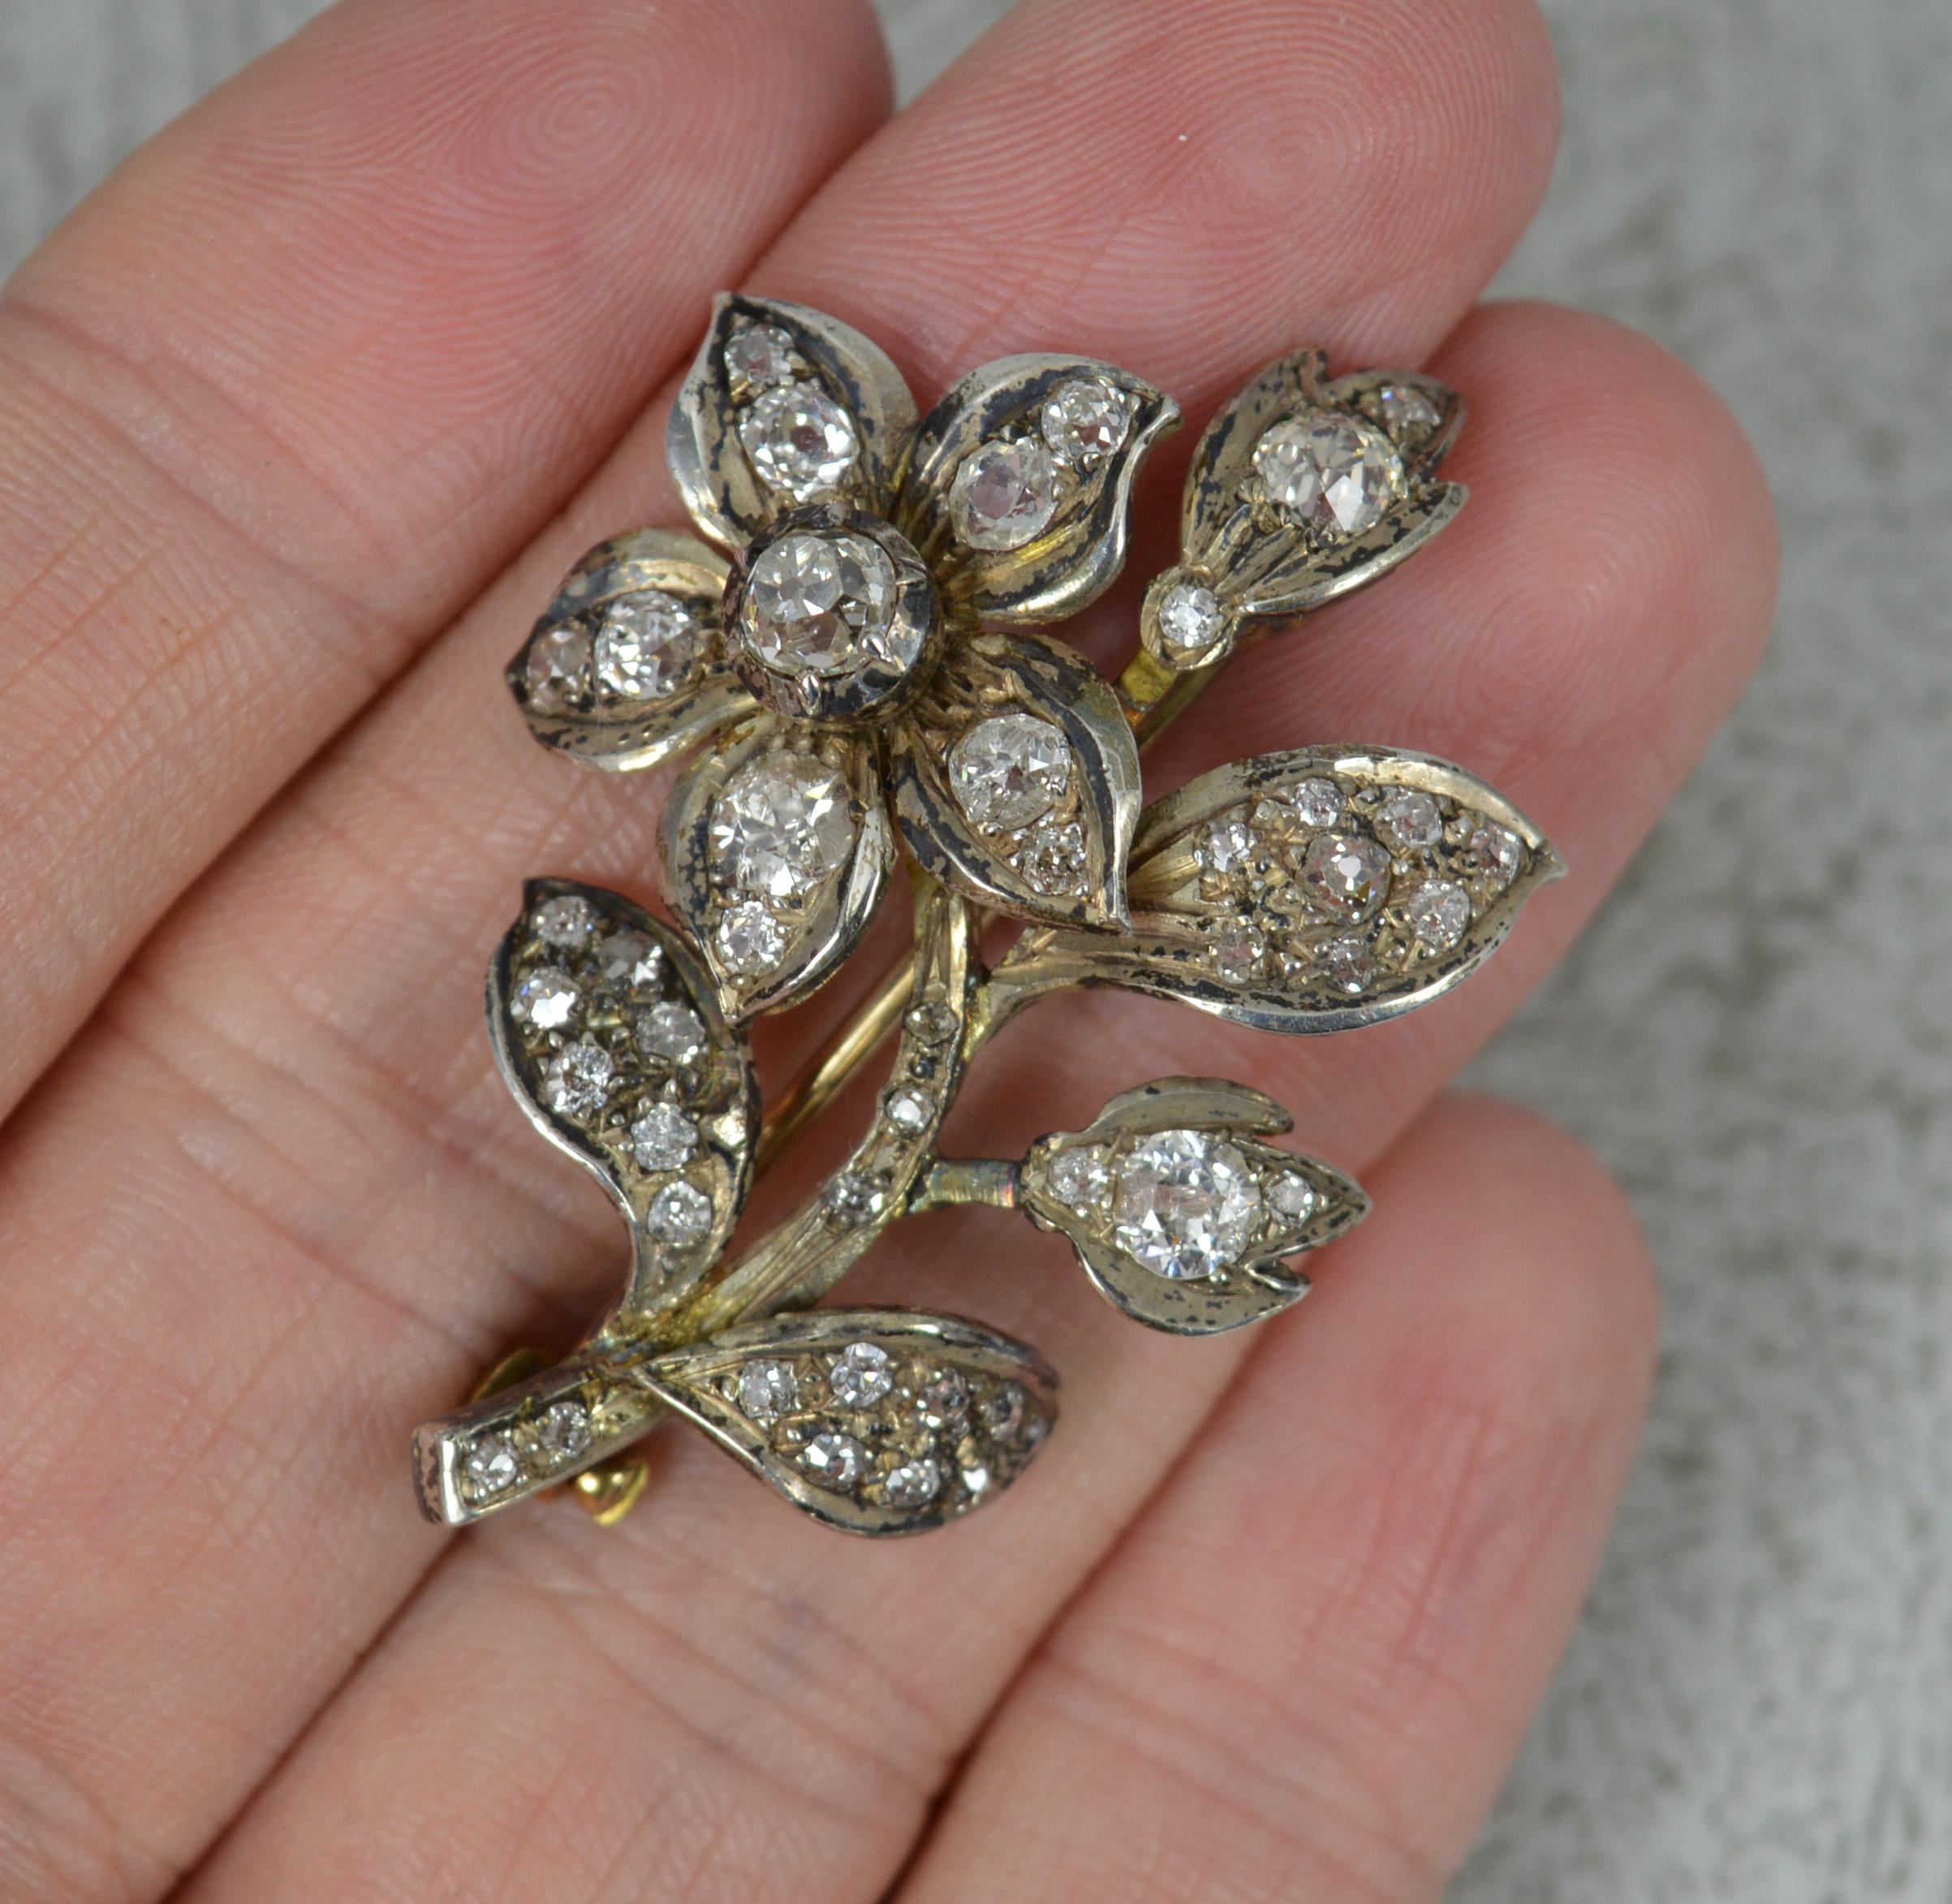 A stunning mid Victorian era brooch.
Solid 15 carat gold example with silver head setting.
Designed as a flower, forget me not shape. Encrusted with natural old mine cut diamonds throughout. Some wonderful, deep cuts. Minimum 2.2 carats. Averaging